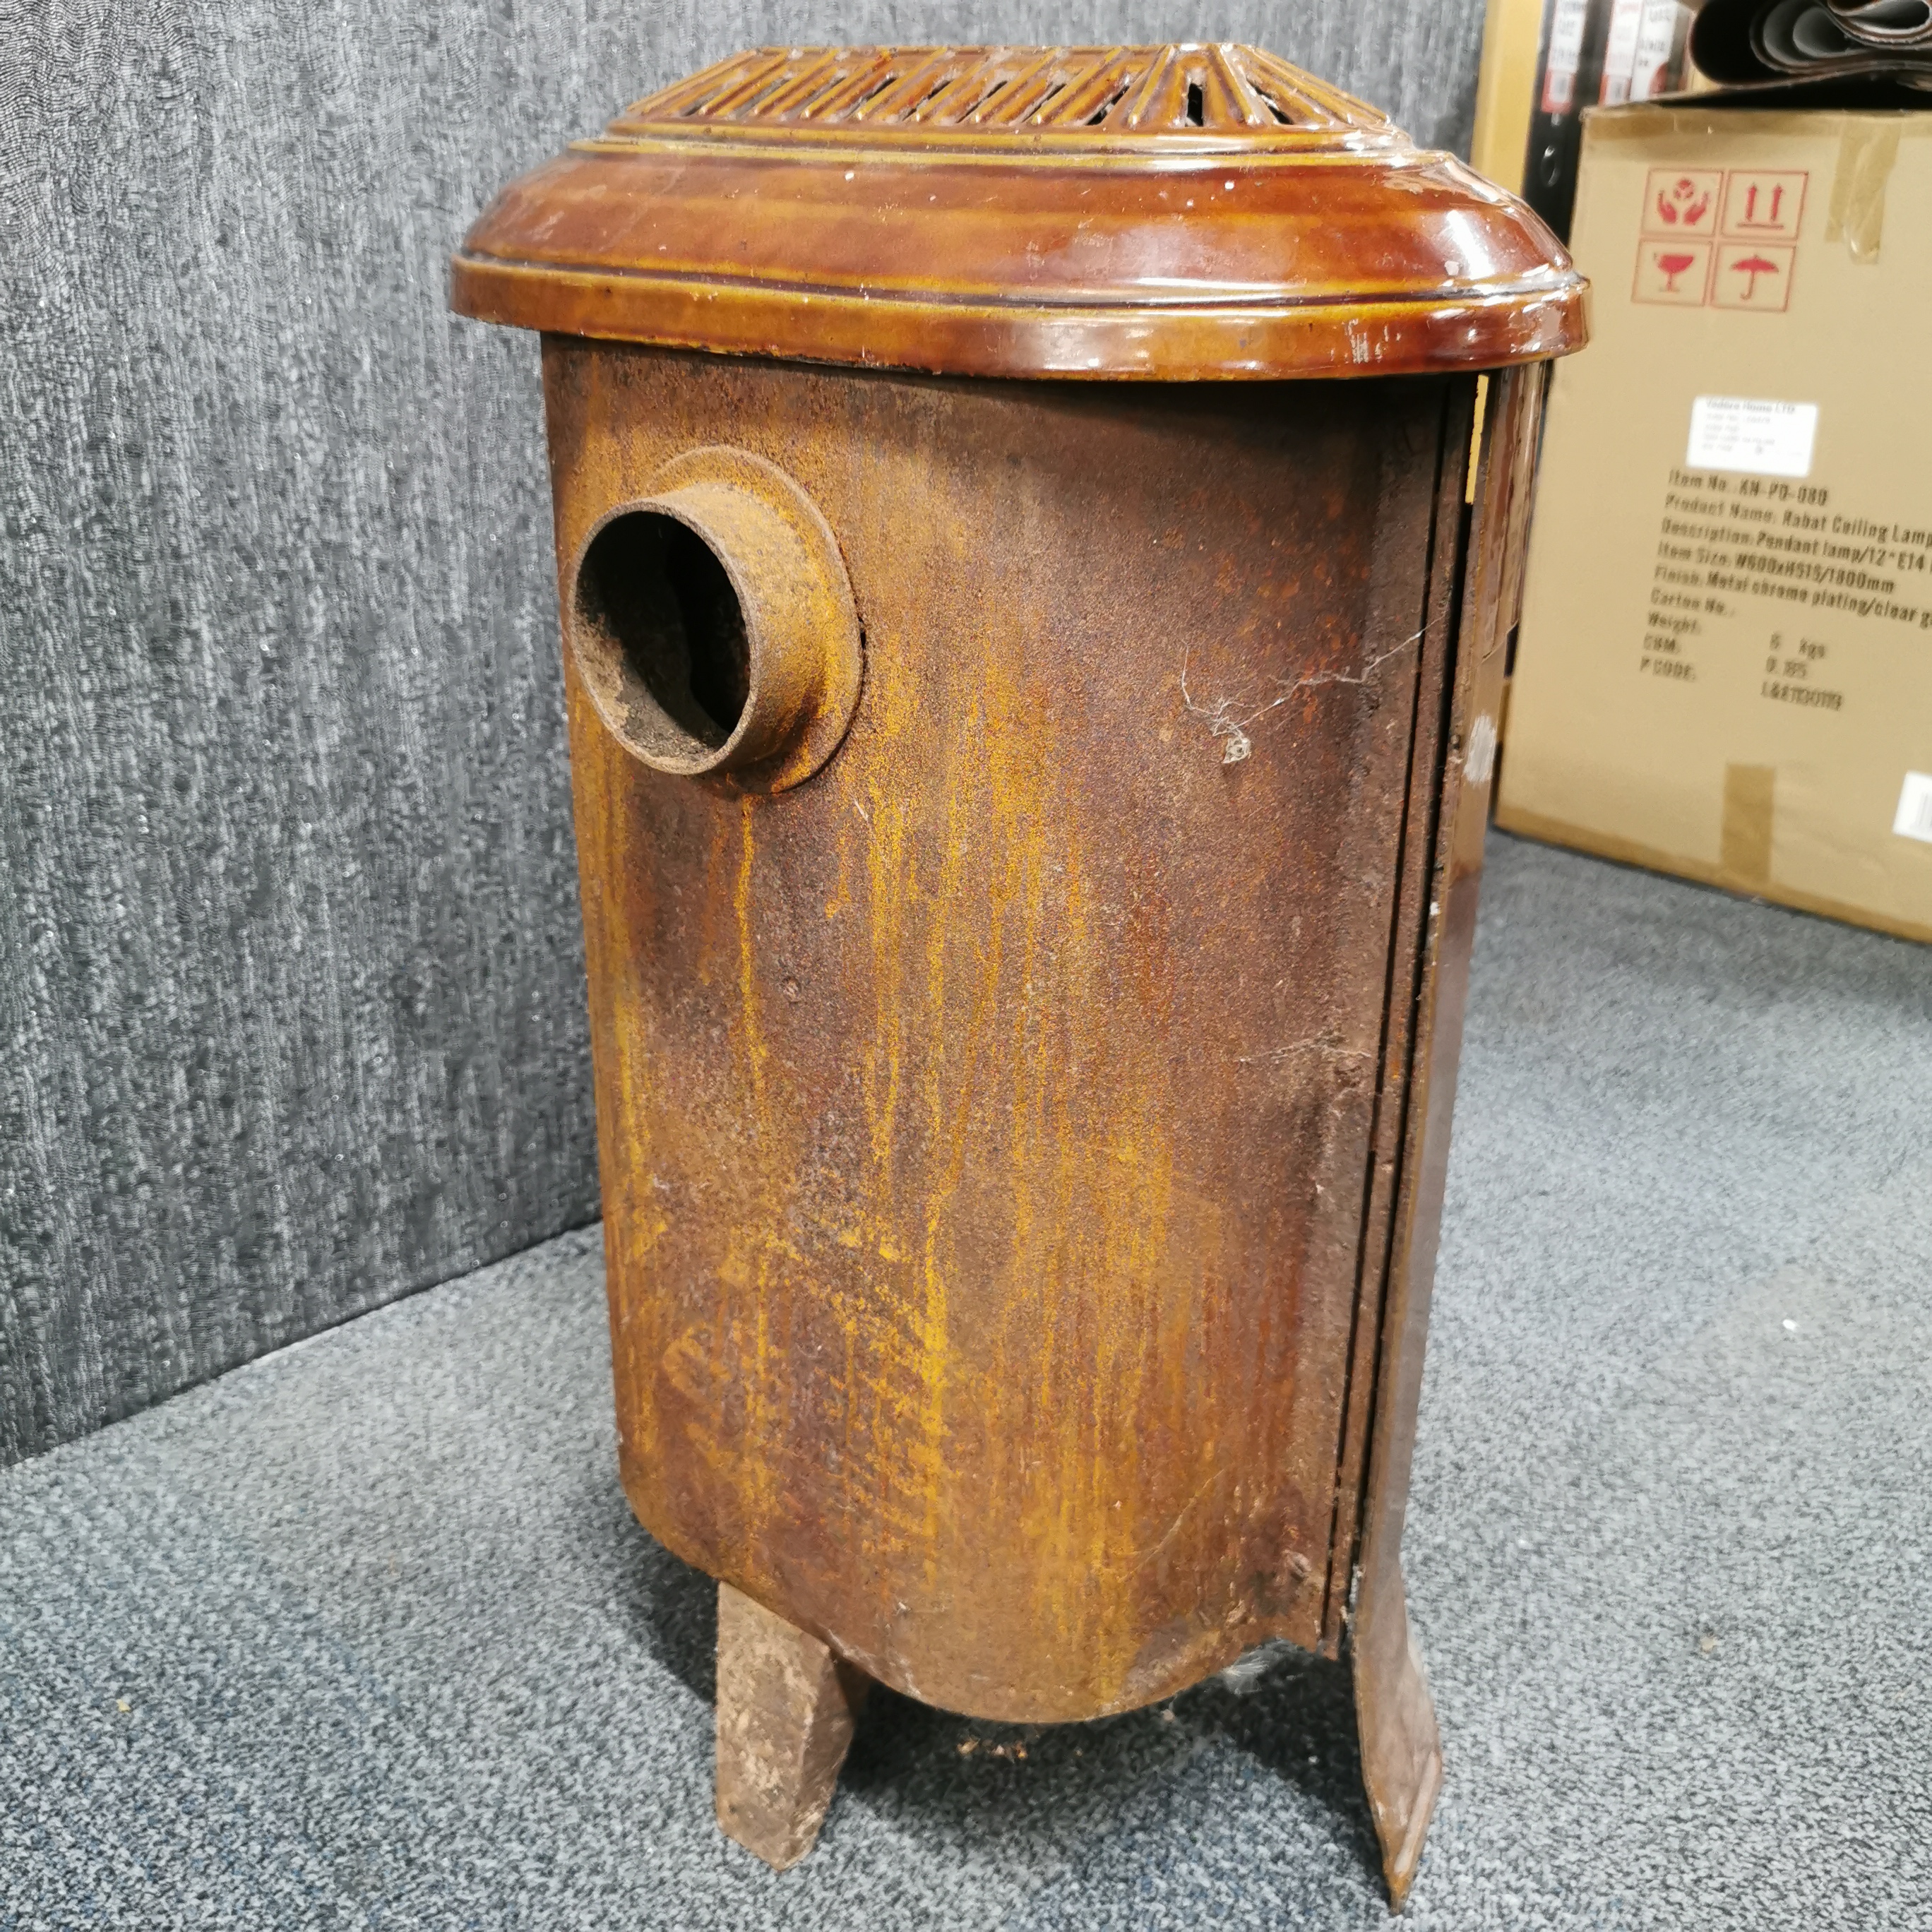 An antique French brown enamelled wood burning stove, 65 x 40 x 30cm. - Image 5 of 15